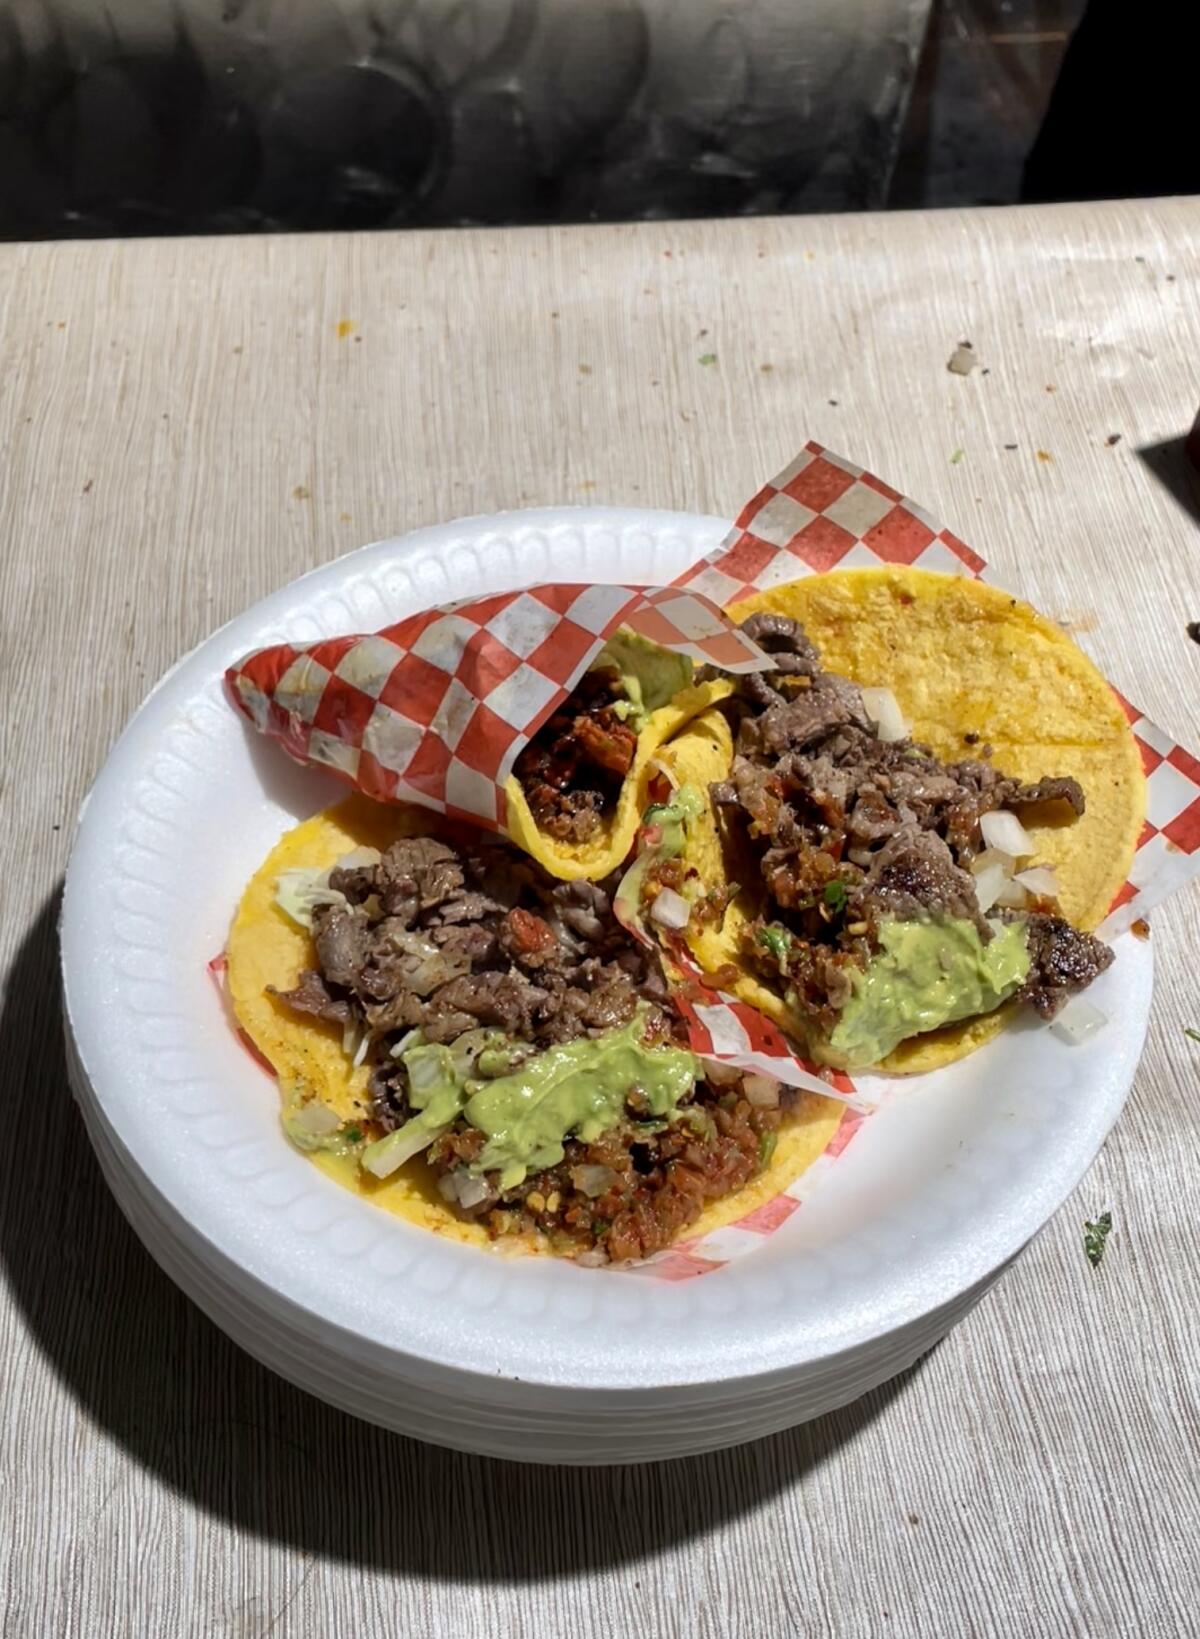 Tijuana-style tacos are one of the offerings available at the Santa Ana de Noche market.